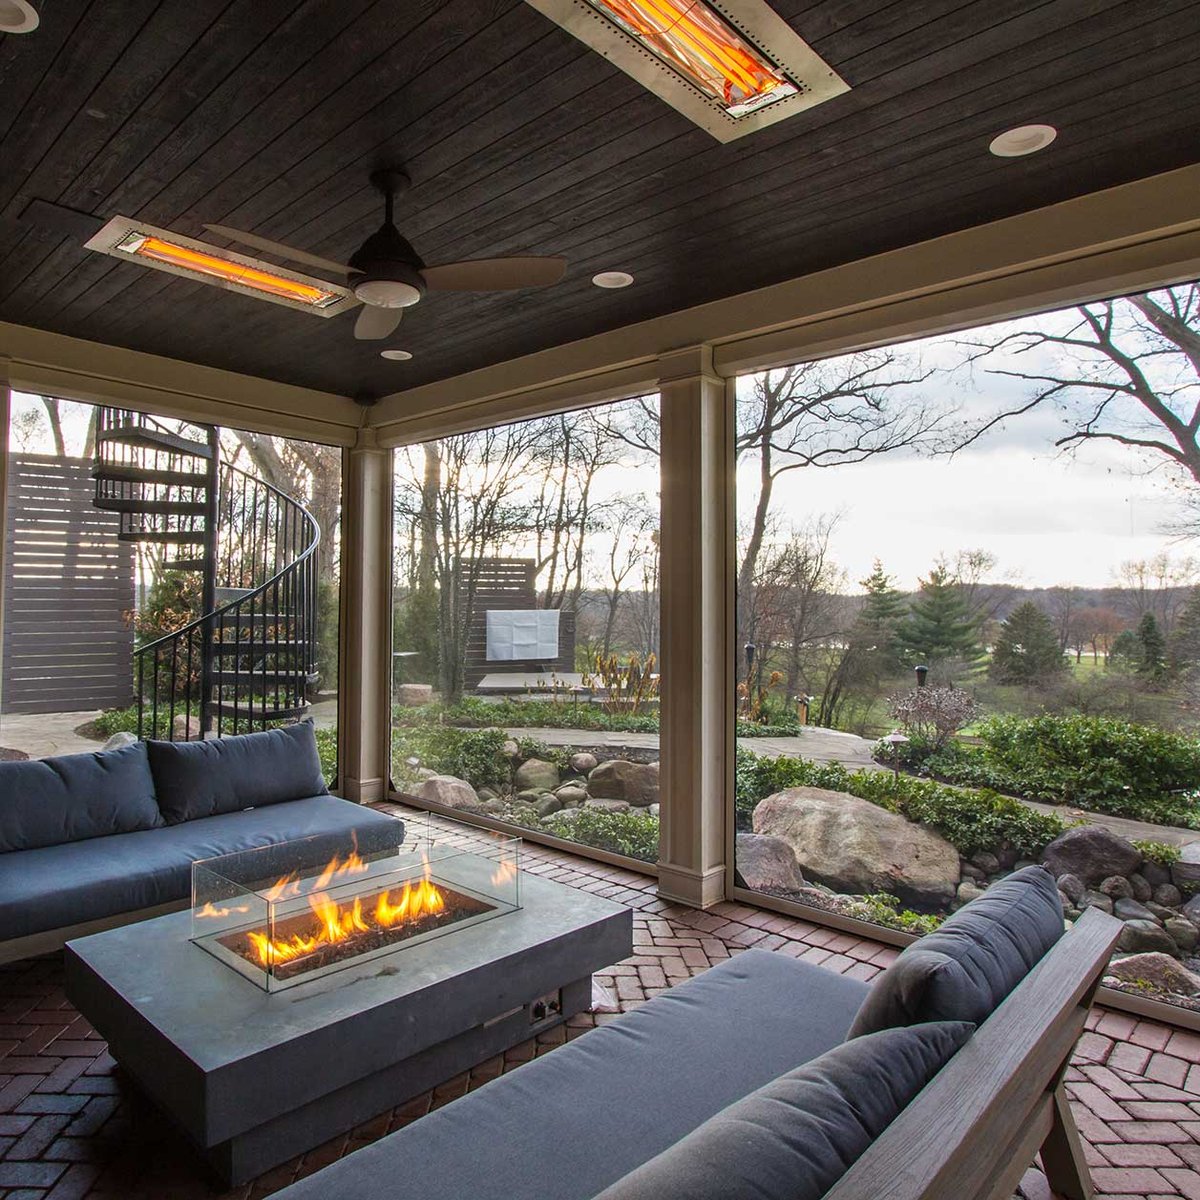 Outdoor fireplace with screened enclosure for relaxing during cold months